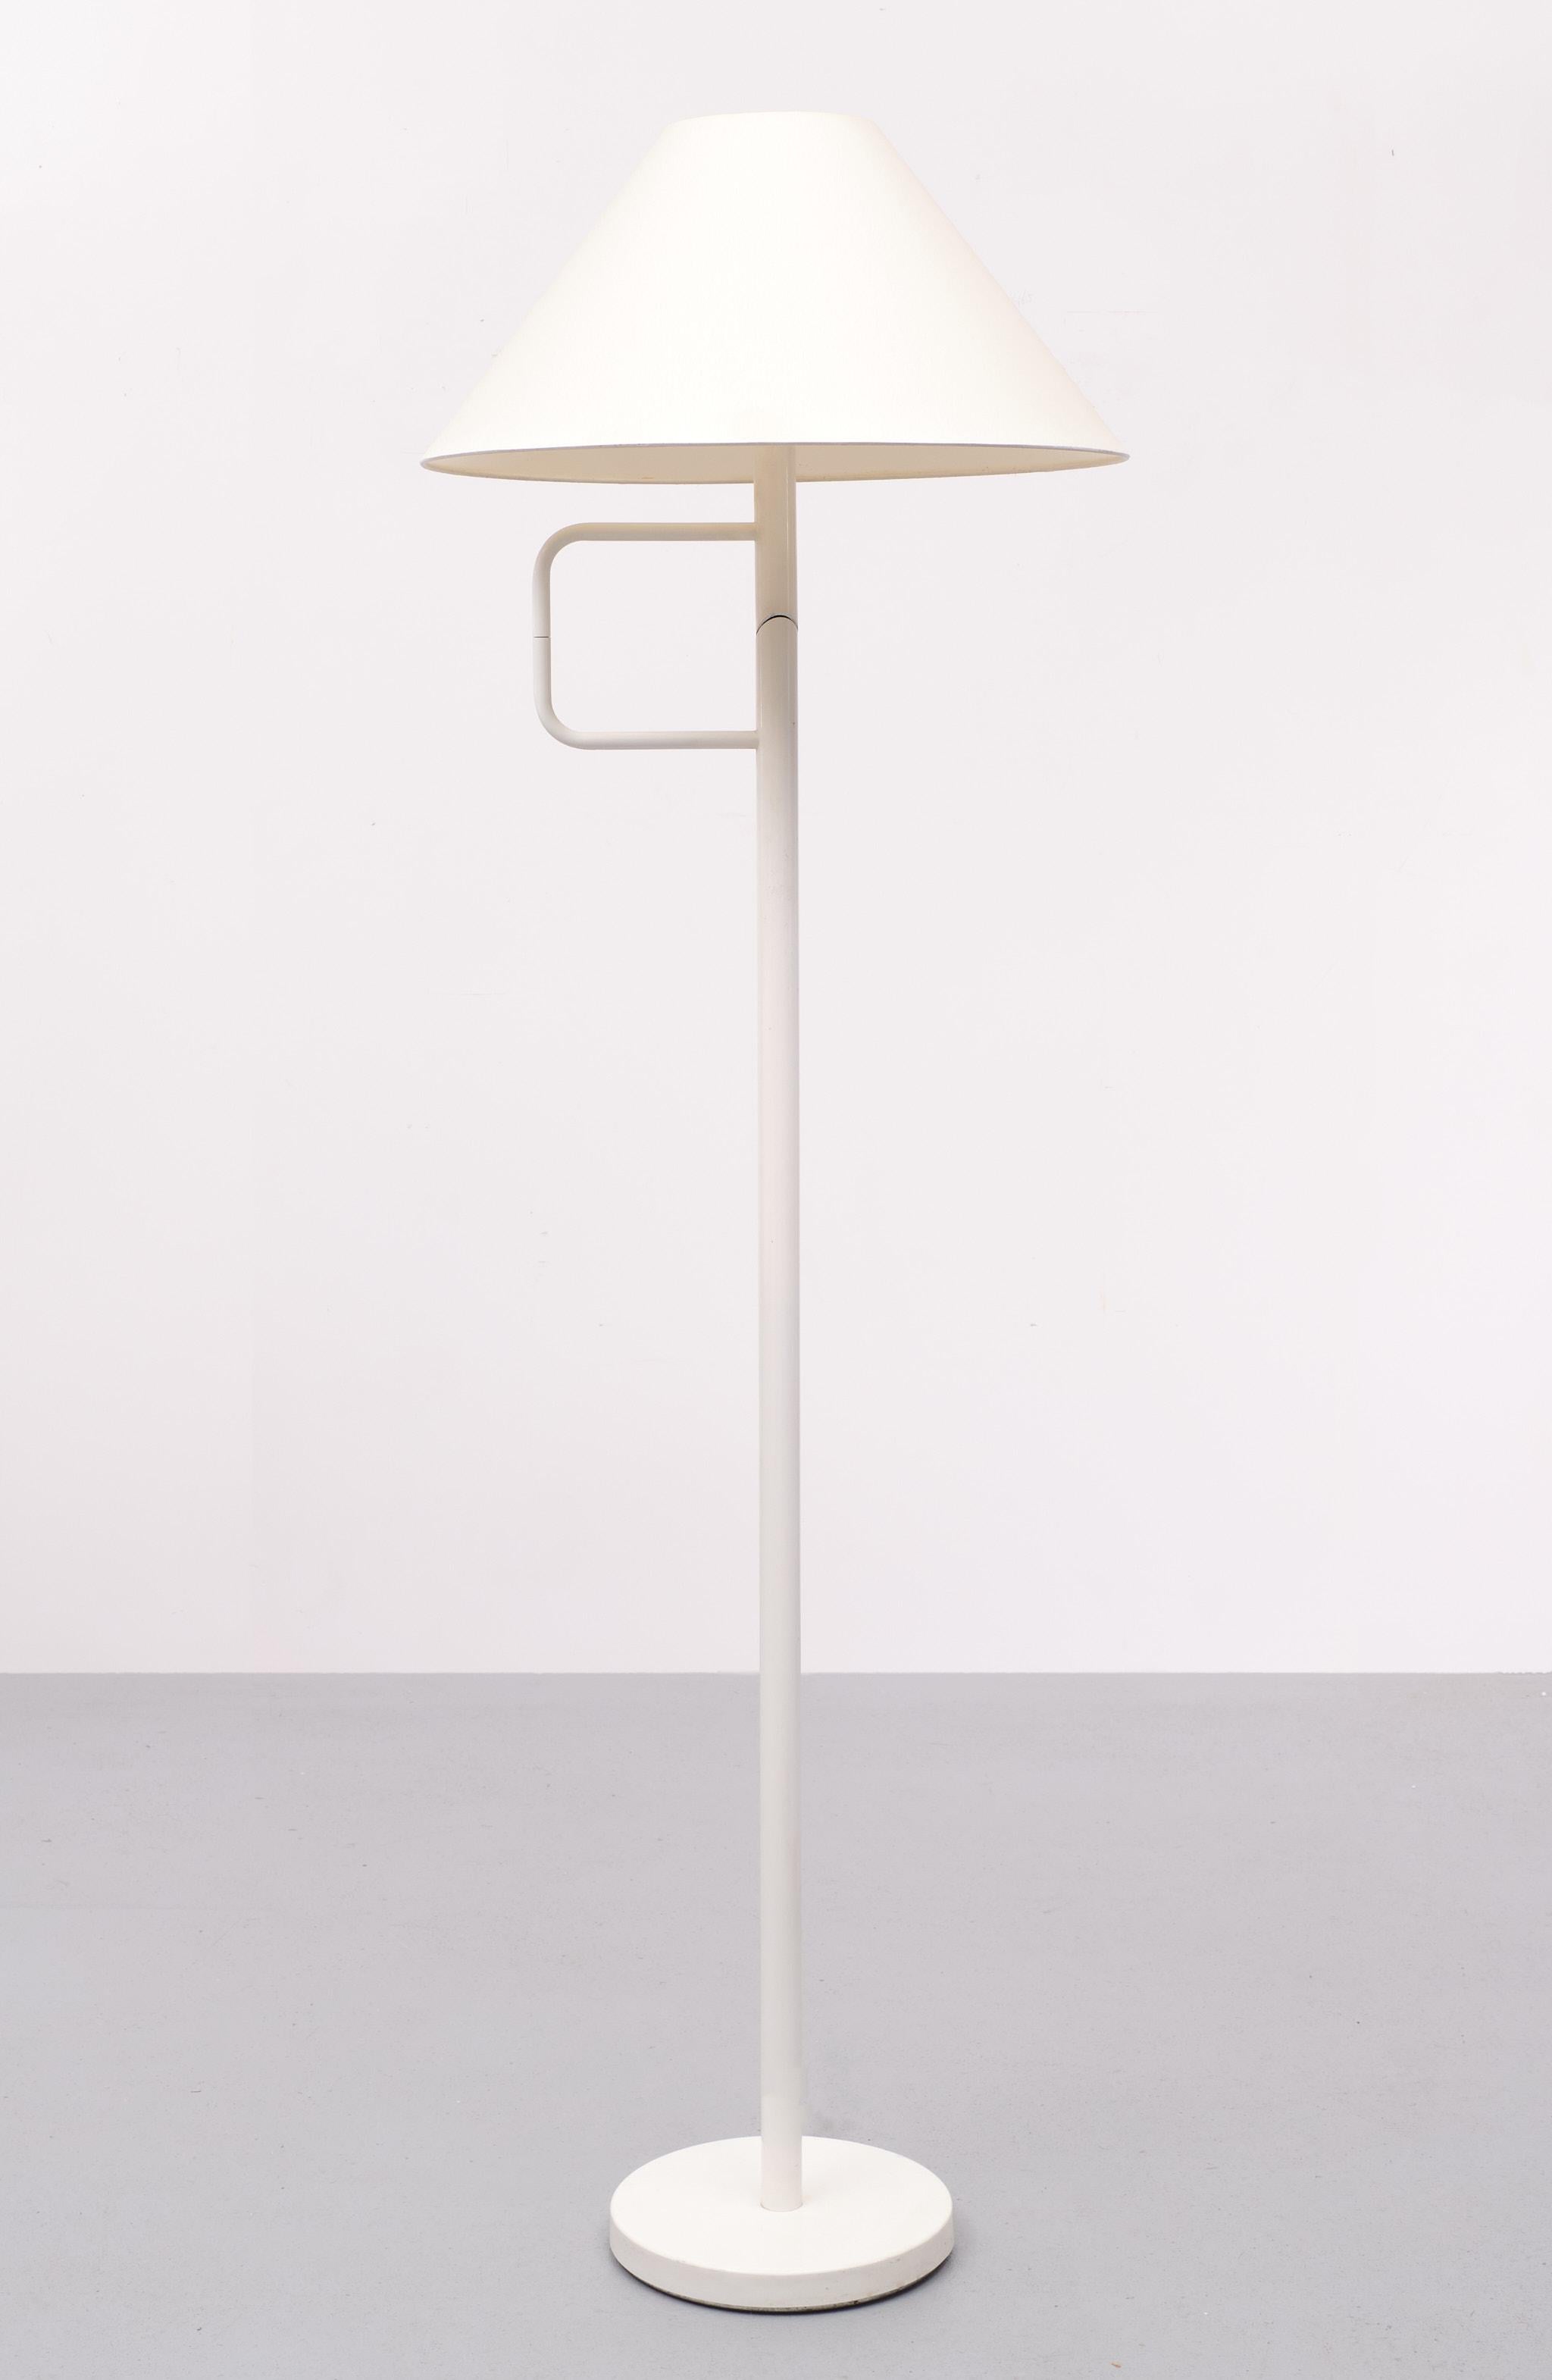 Unique Dutch Design Floor Lamp, white tube frame .looks like it its been saw in two pieces, very smart design by Dijkstra Holland in the 1970s . Two large E27 bulbs needed. Good condition . comes with its original shade.

Please don't hesitate to